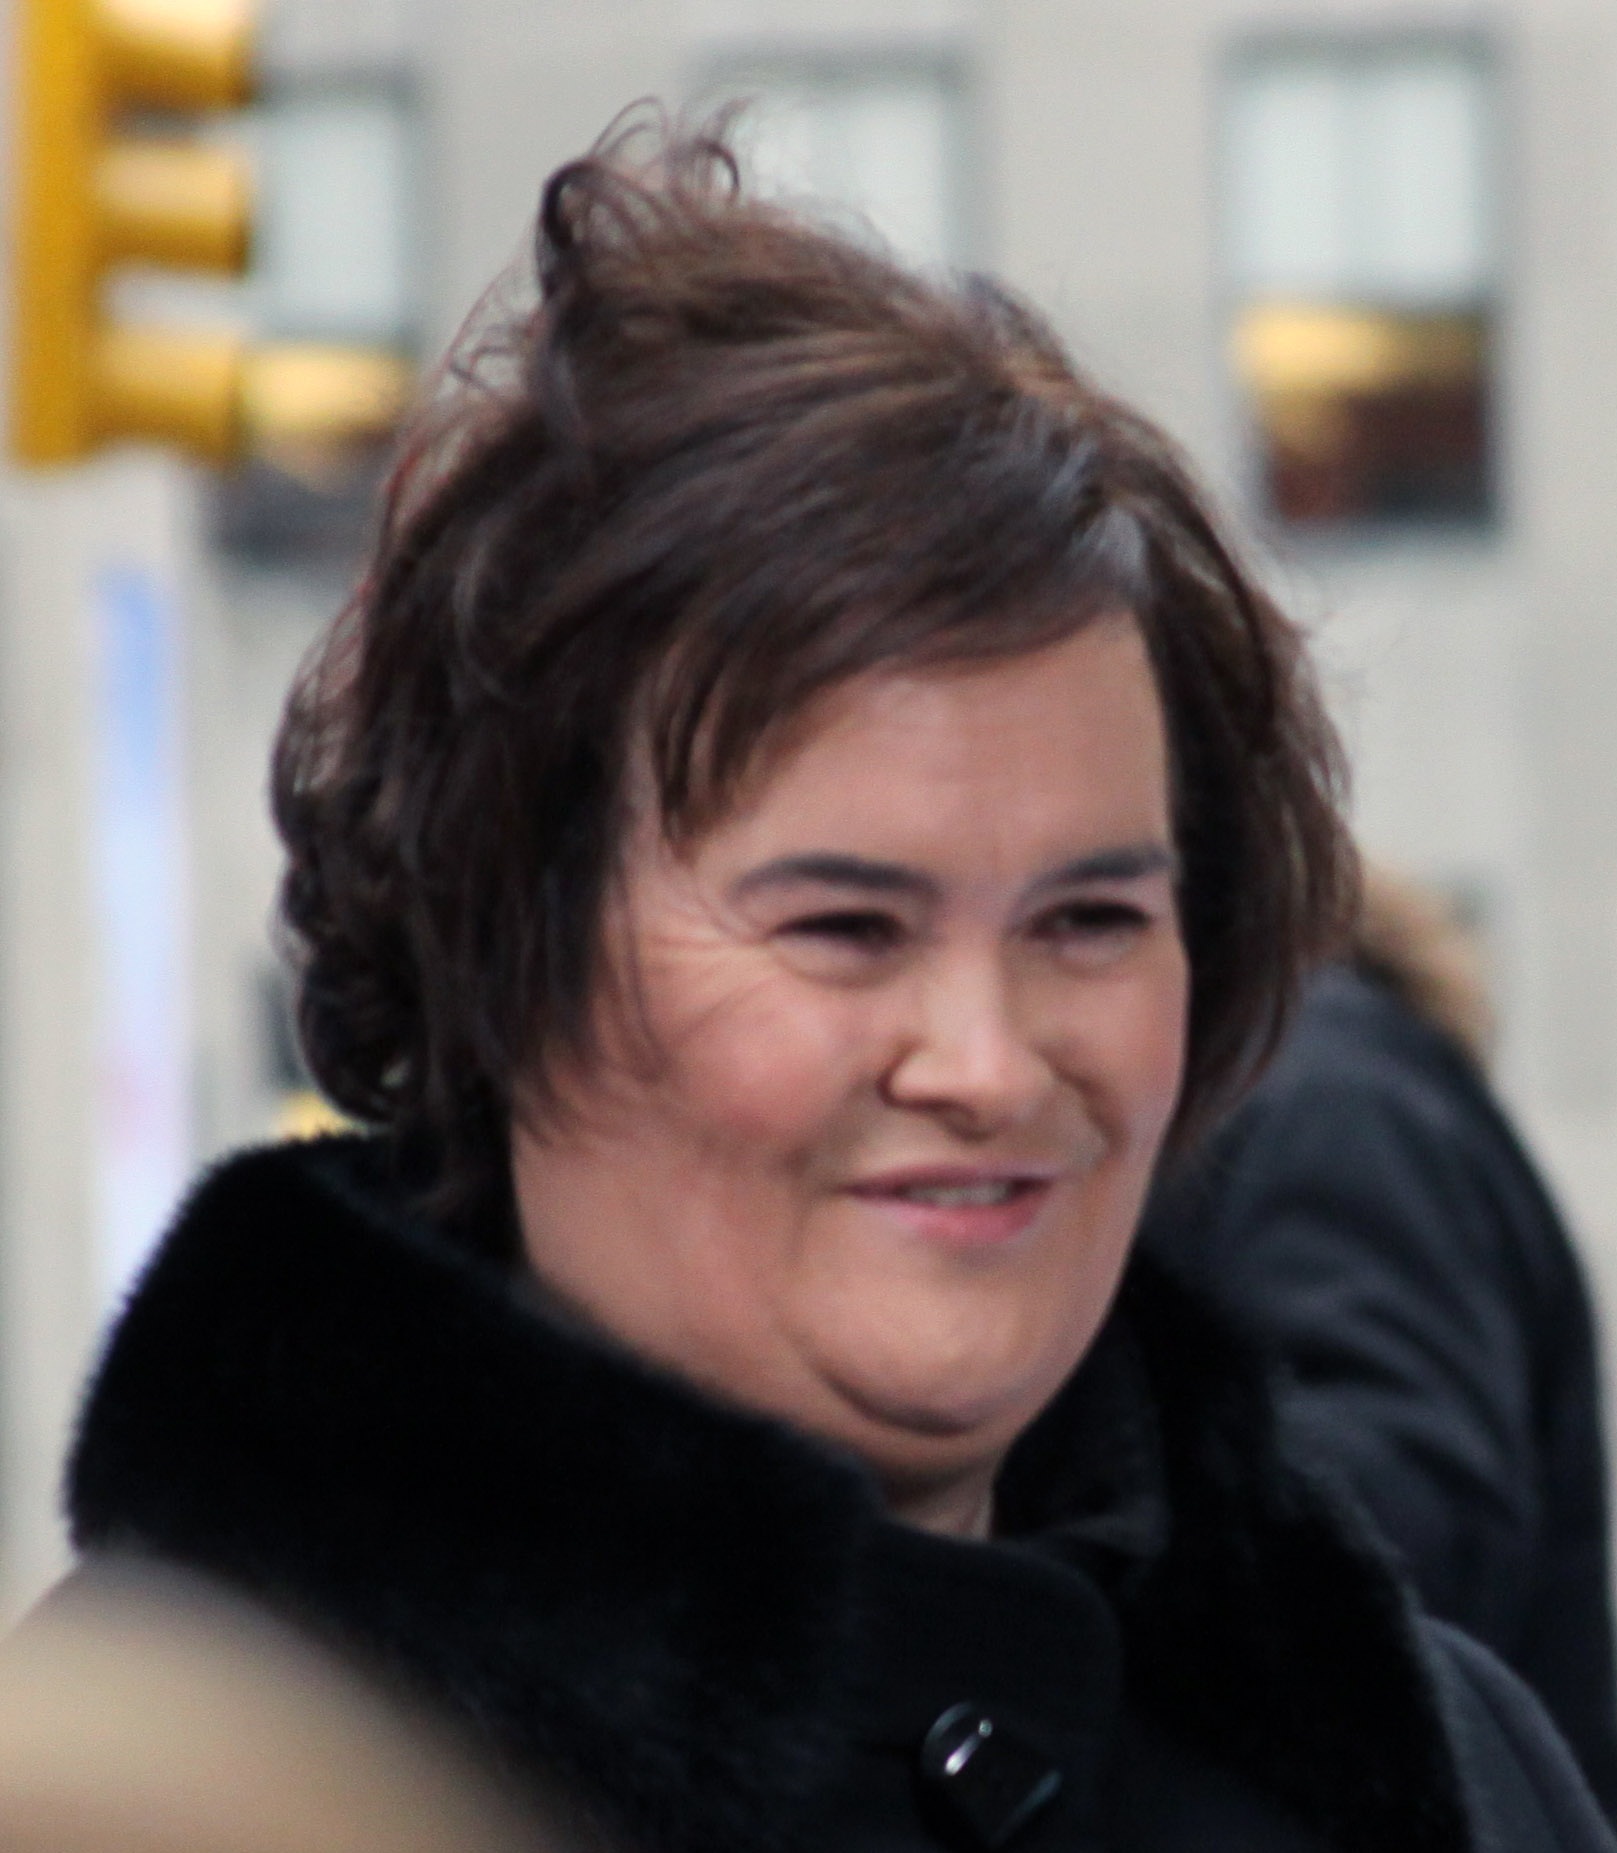 Susan Boyle Gets First Boyfriend at 53, But Why Are People 